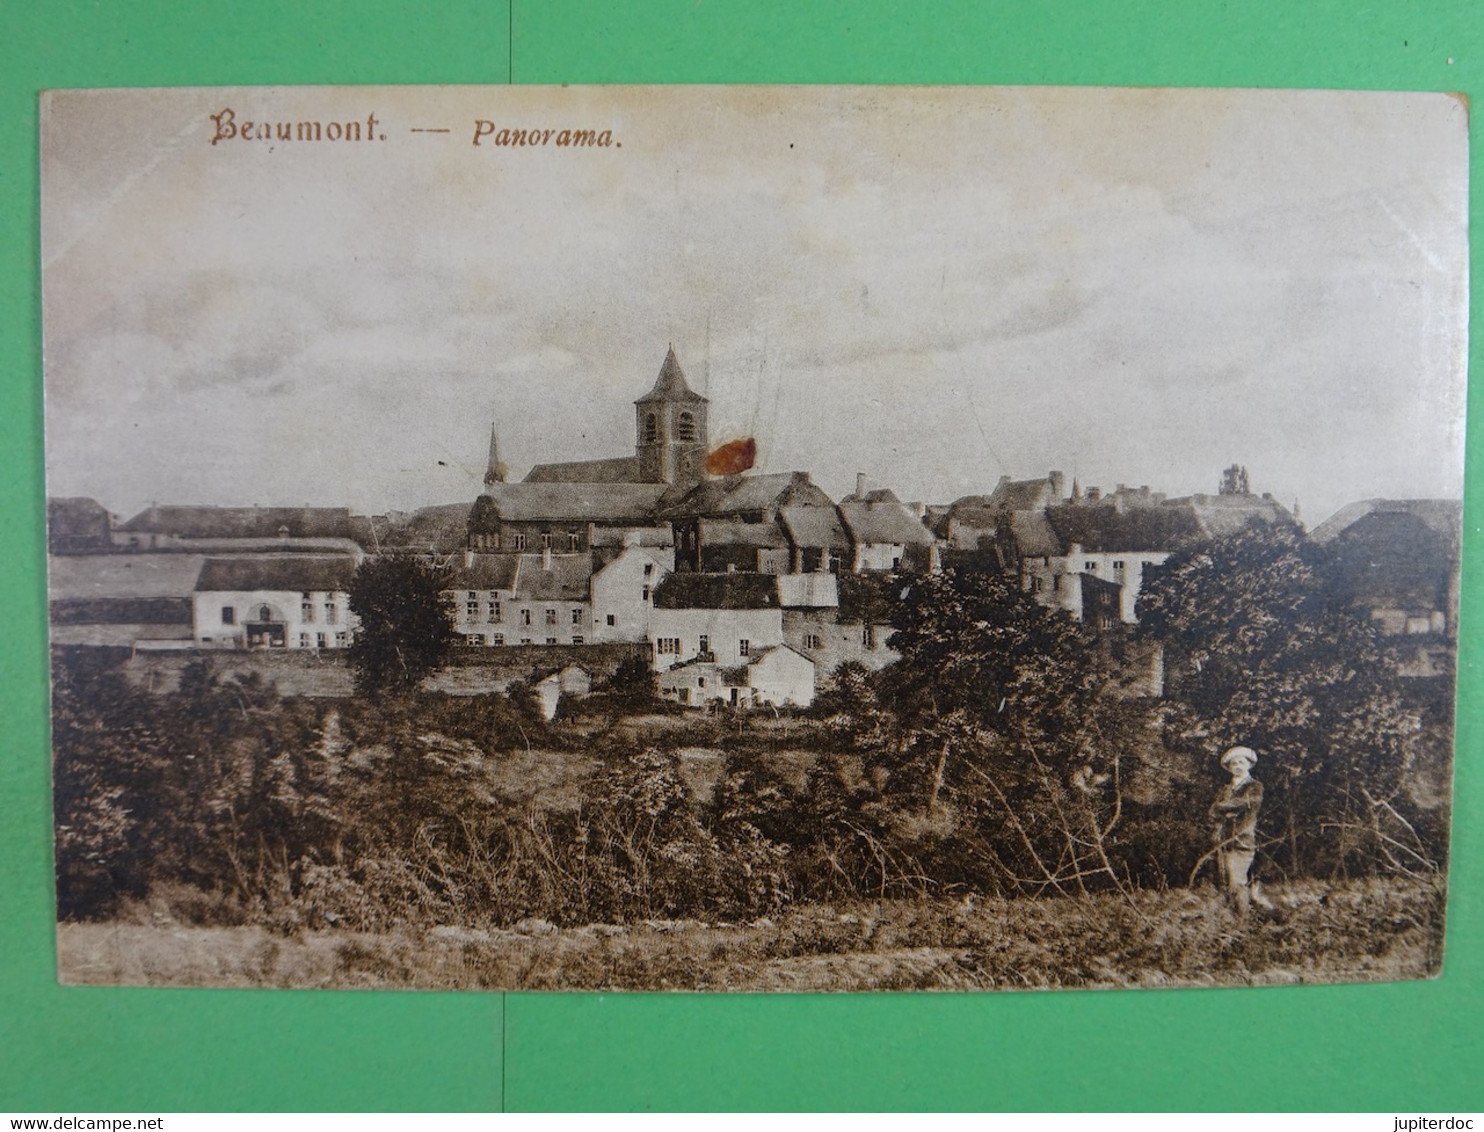 Beaumont Panorama - Beaumont